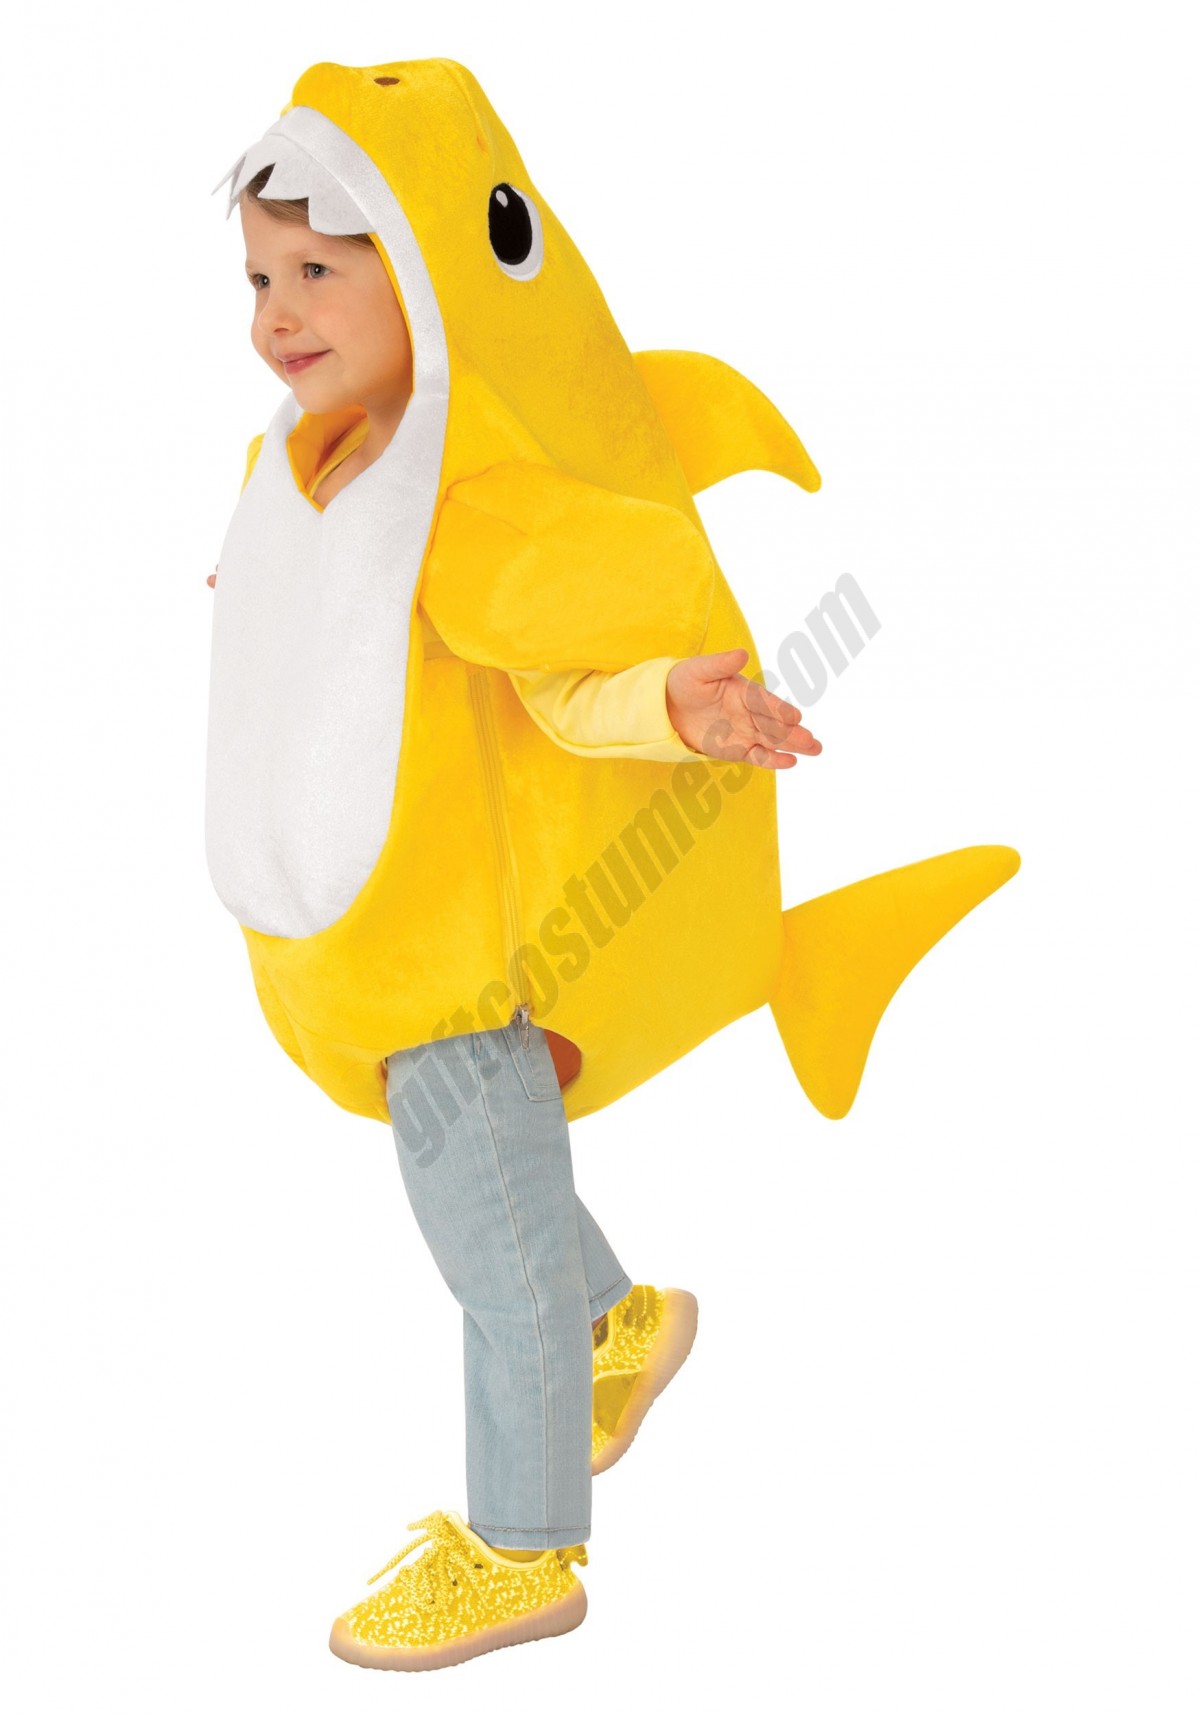 Baby Shark Toddler Costume with Sound Chip Promotions - -0